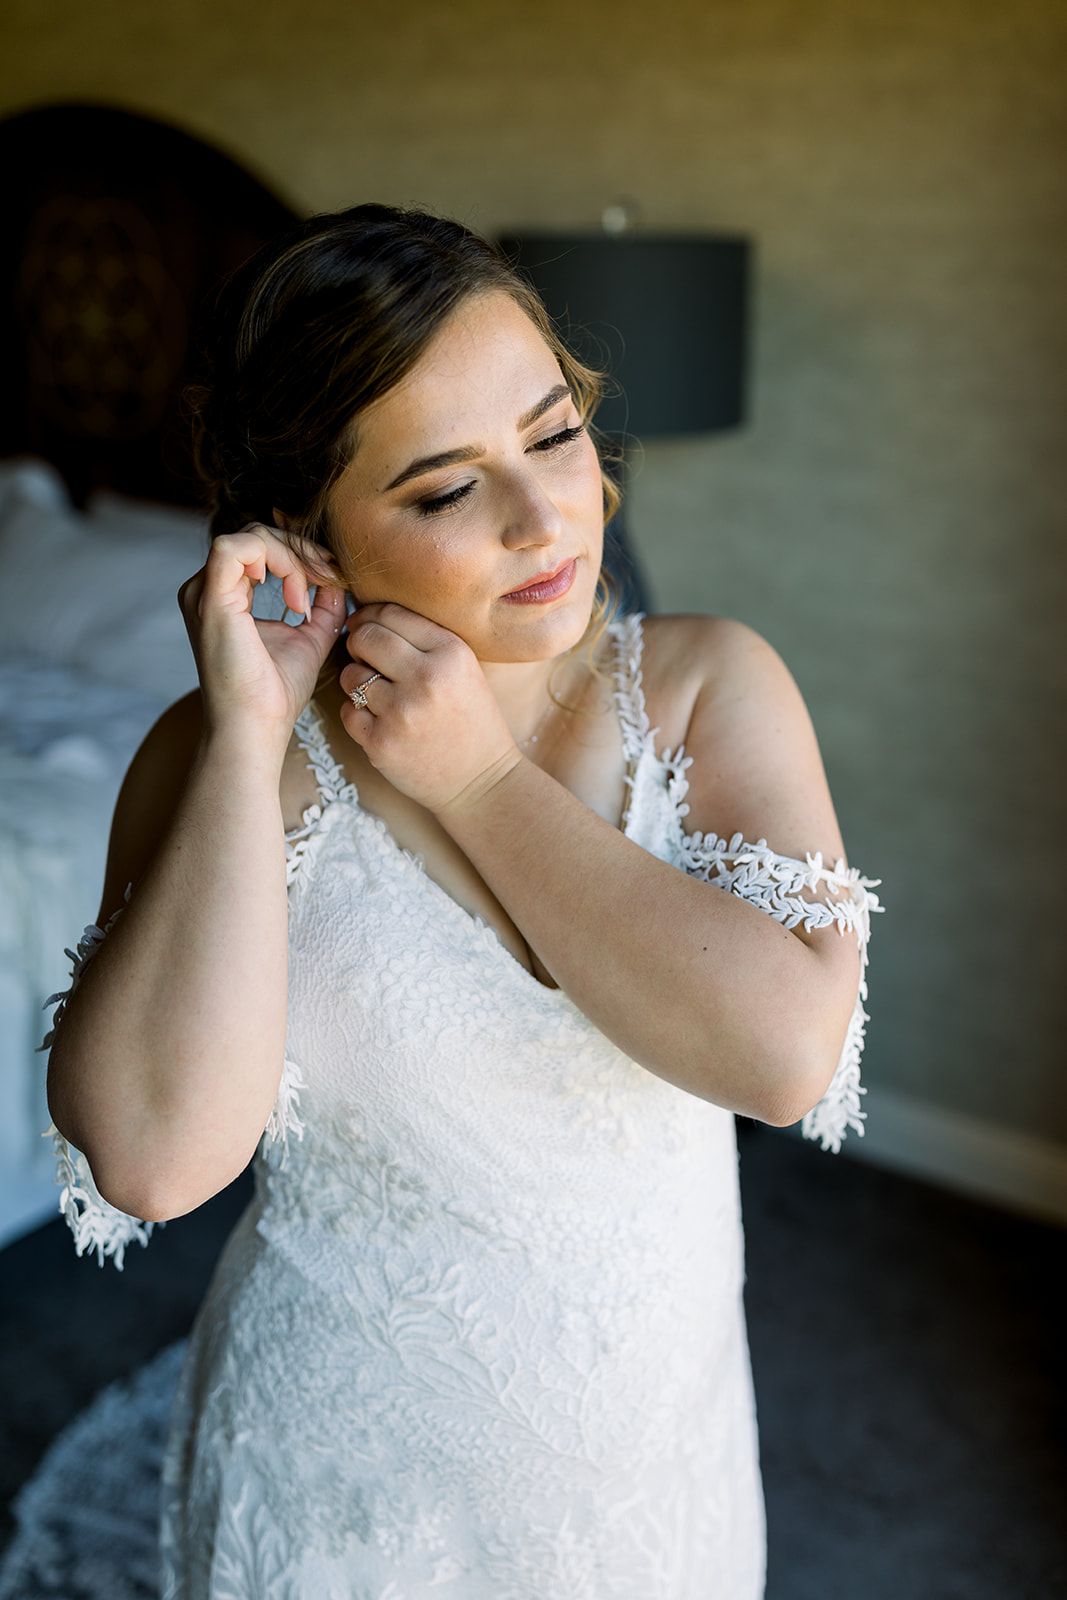 Bride gets ready for her wedding day